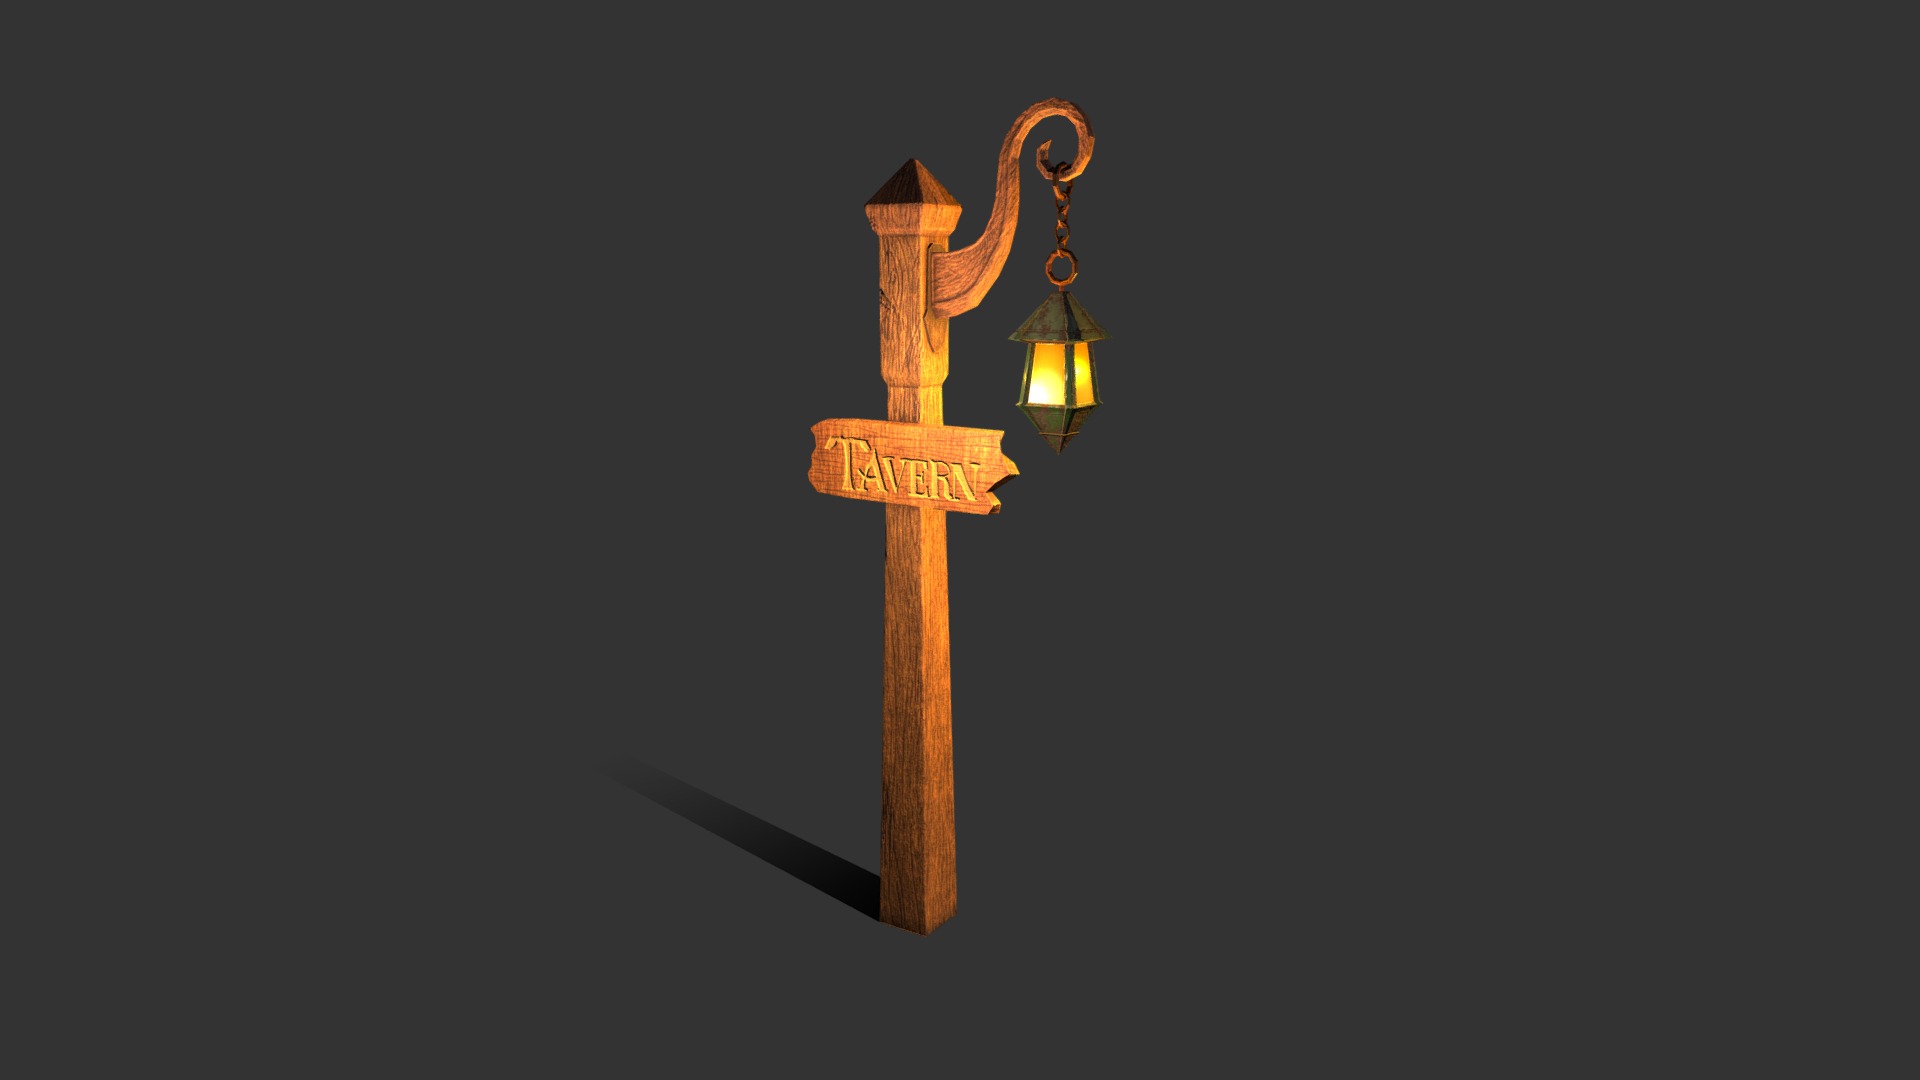 Part of a set of Tavern related objects and props 3d model